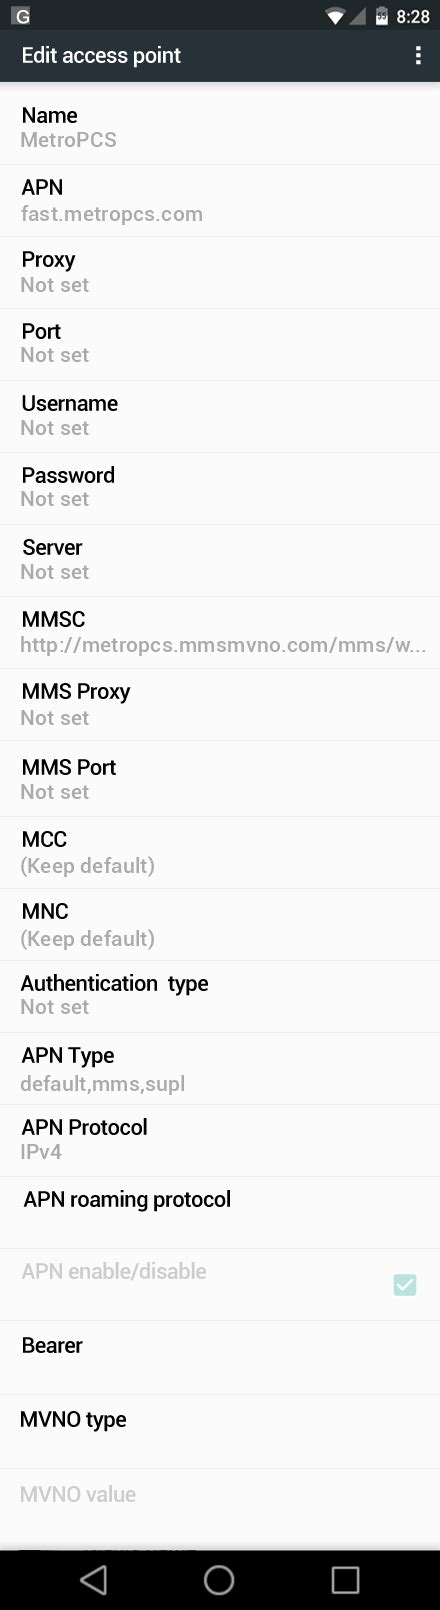 Metropcs Samsung Galaxy S7 Internet And Mms Apn Settings For United